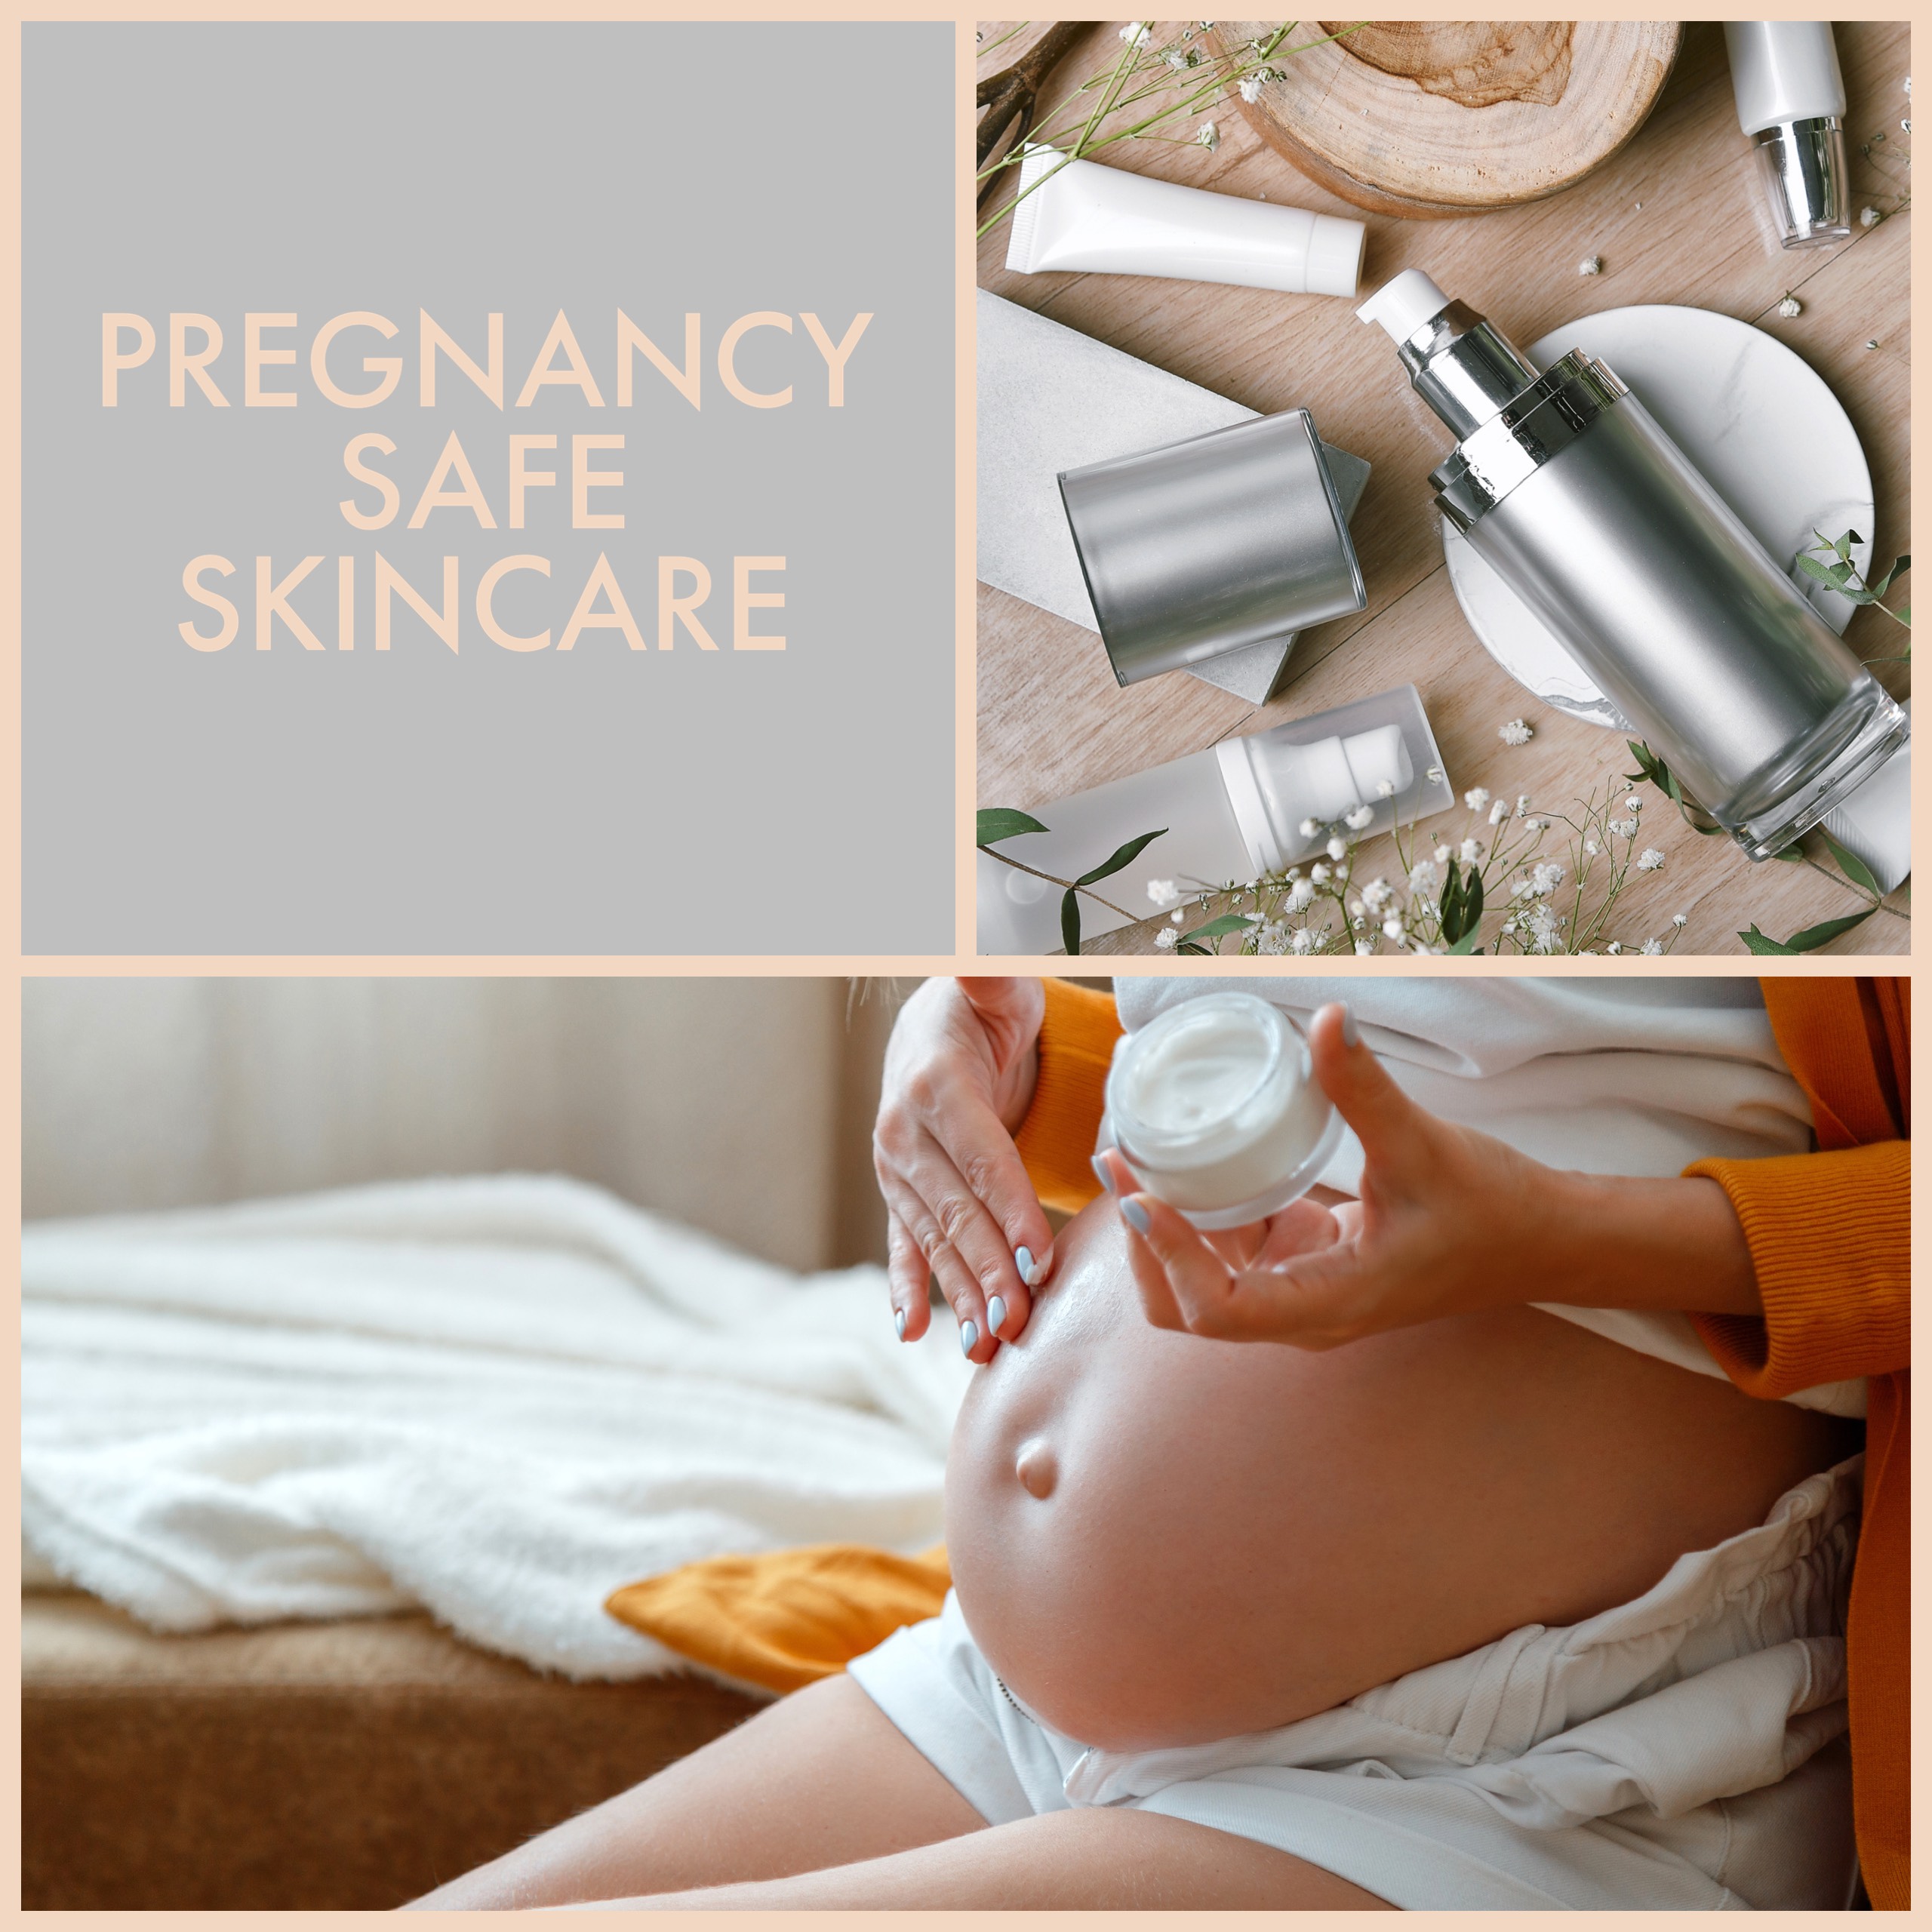 Pregnancy Safe Skincare: Tips for Keeping Your Skin Healthy During